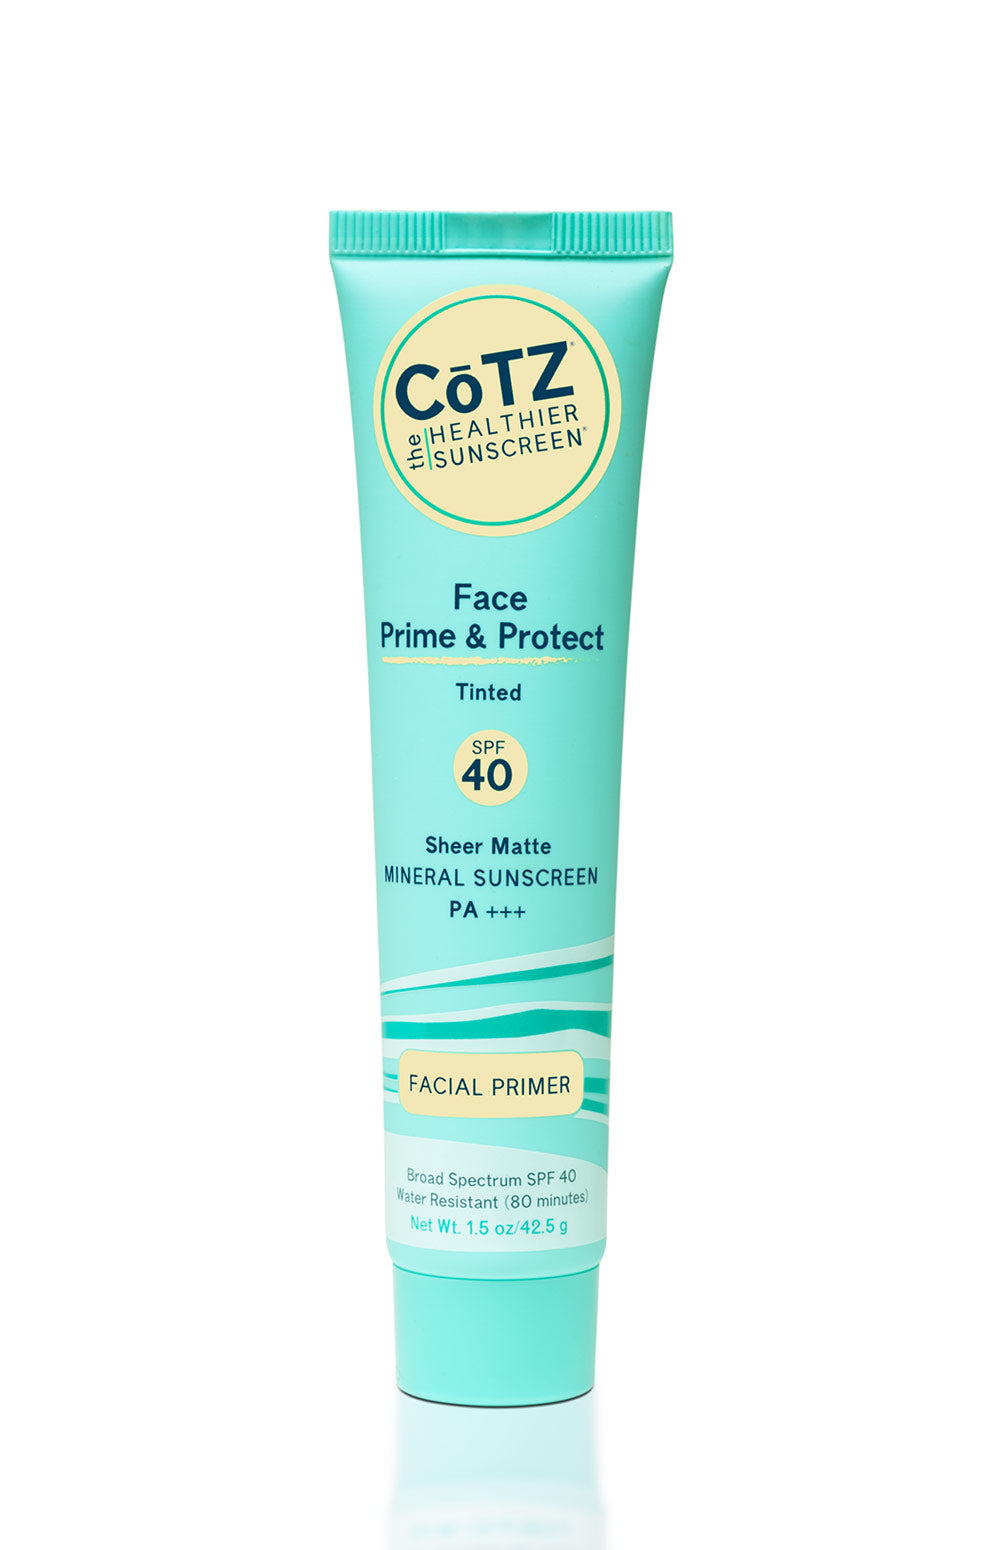 Face Prime & Protect SPF 40 Tinted